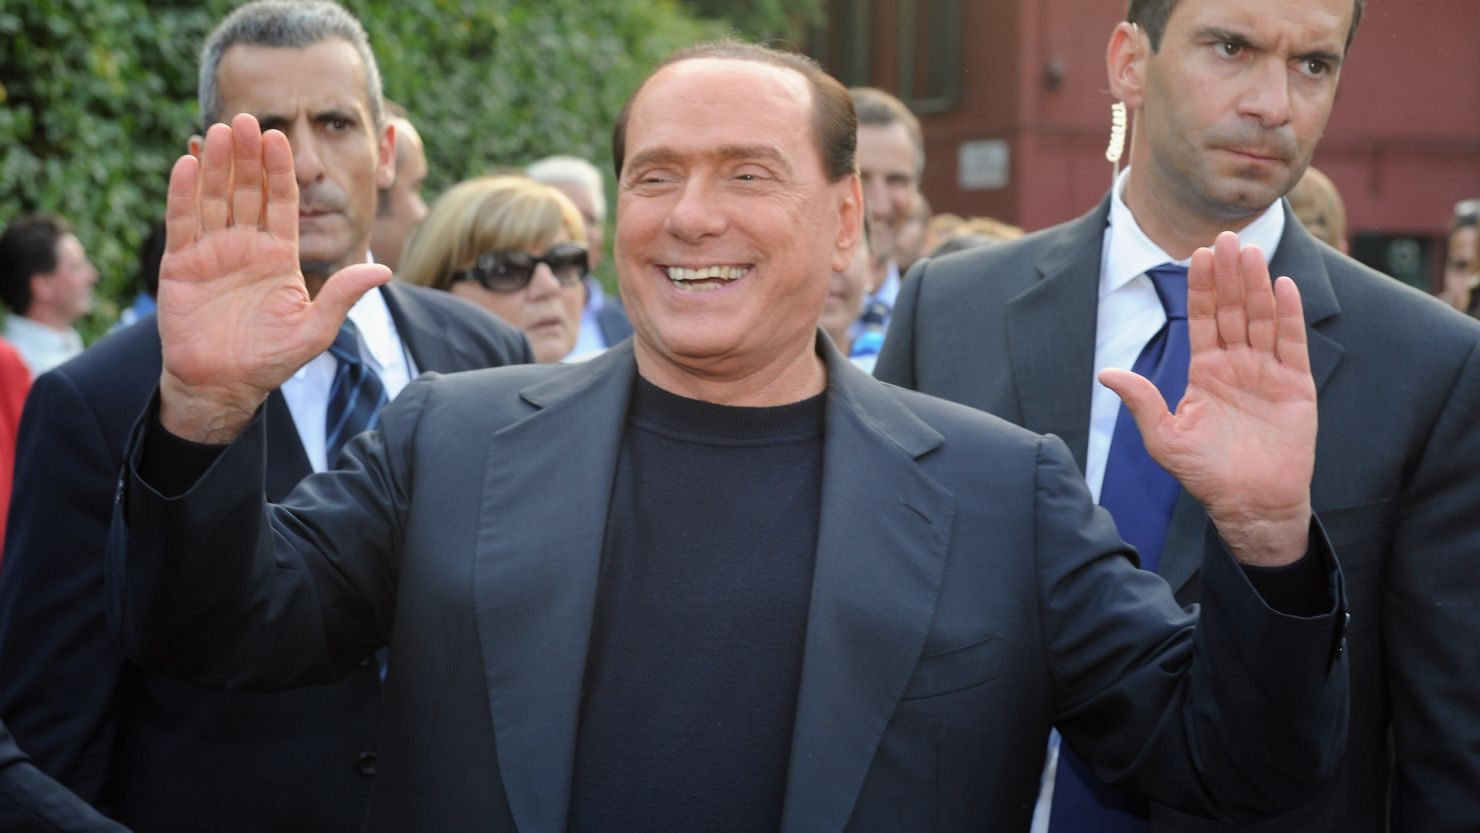 Italy's former Prime Minister Silvio Berlusconi hails supporters in front of his house in Milan in 2013.